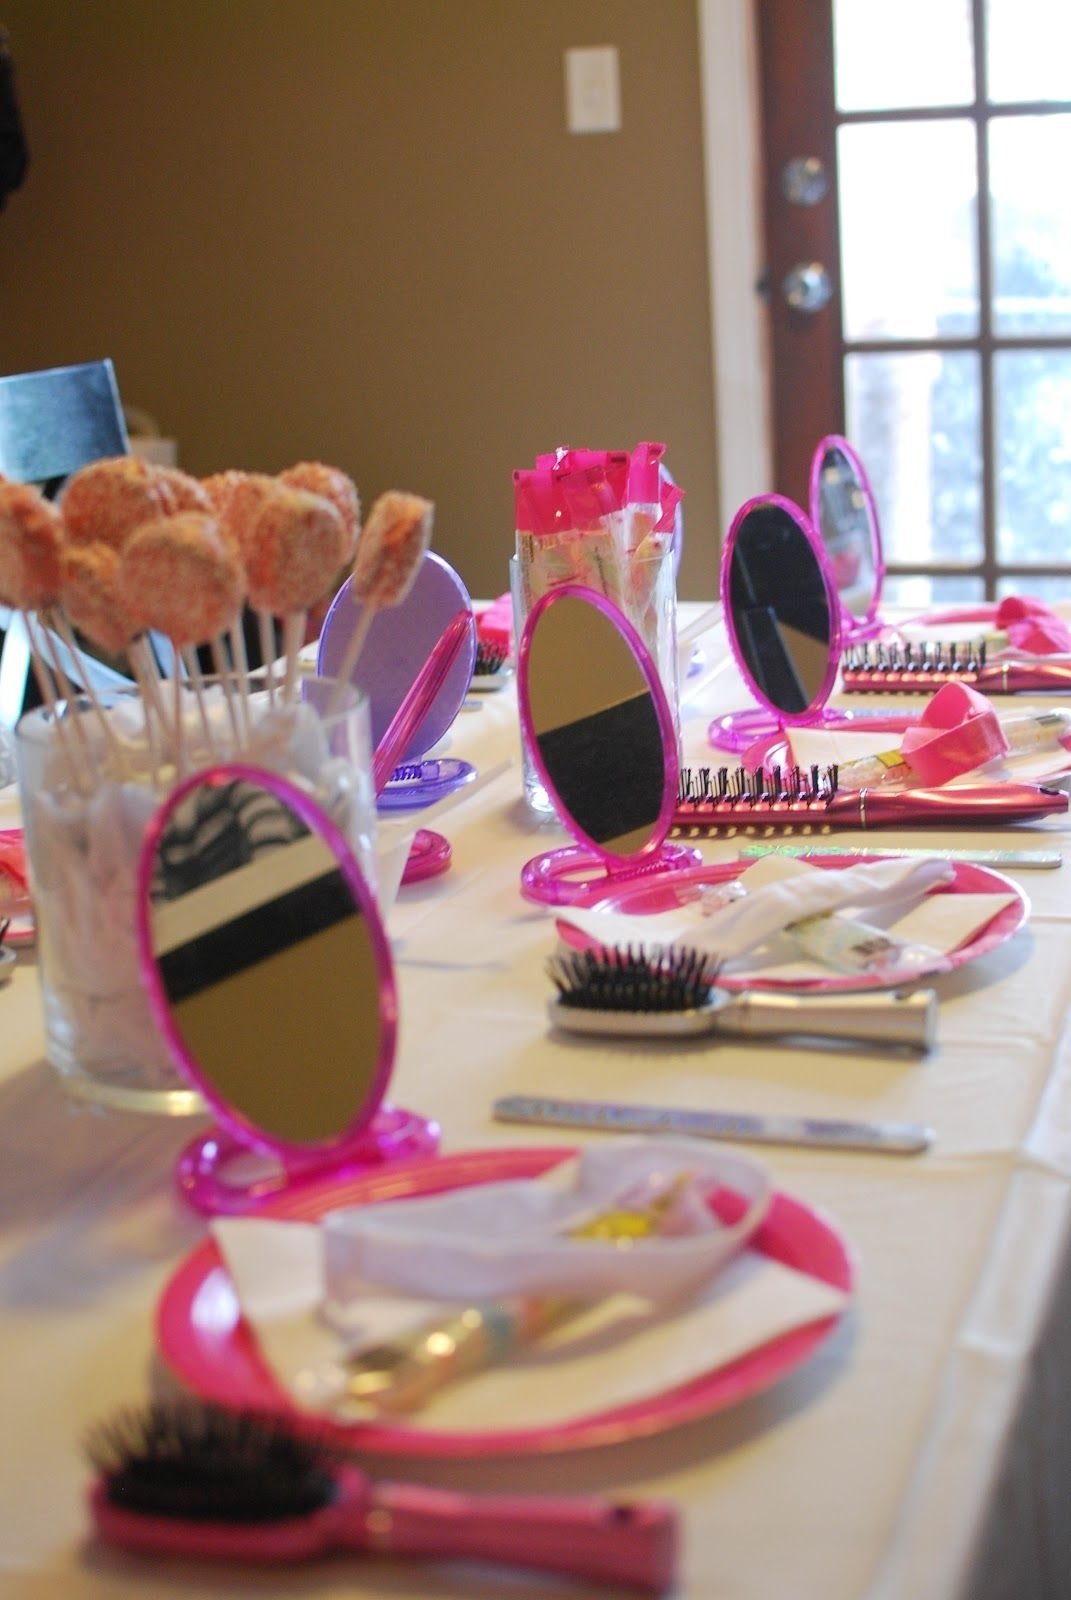 10 Most Popular 8 Year Old Birthday Party Ideas spa party ideas for 8 yr old girls remember this for the twins 1 2022